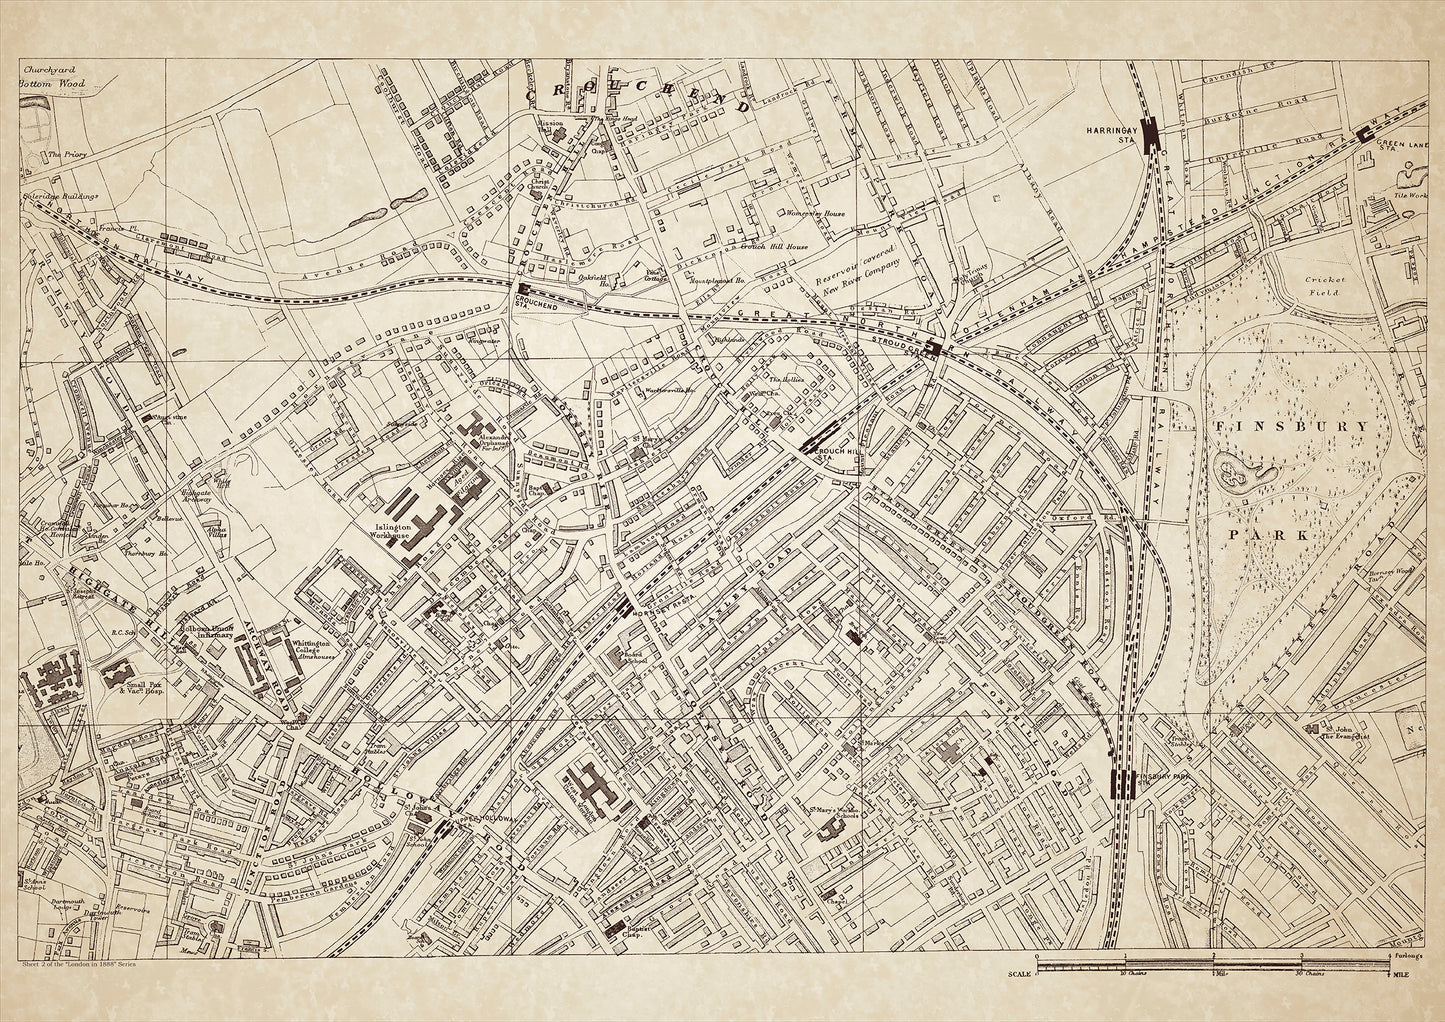 London in 1888 Series - showing Crouch End, Highgate Hill, Finsbury Park - sheet 2